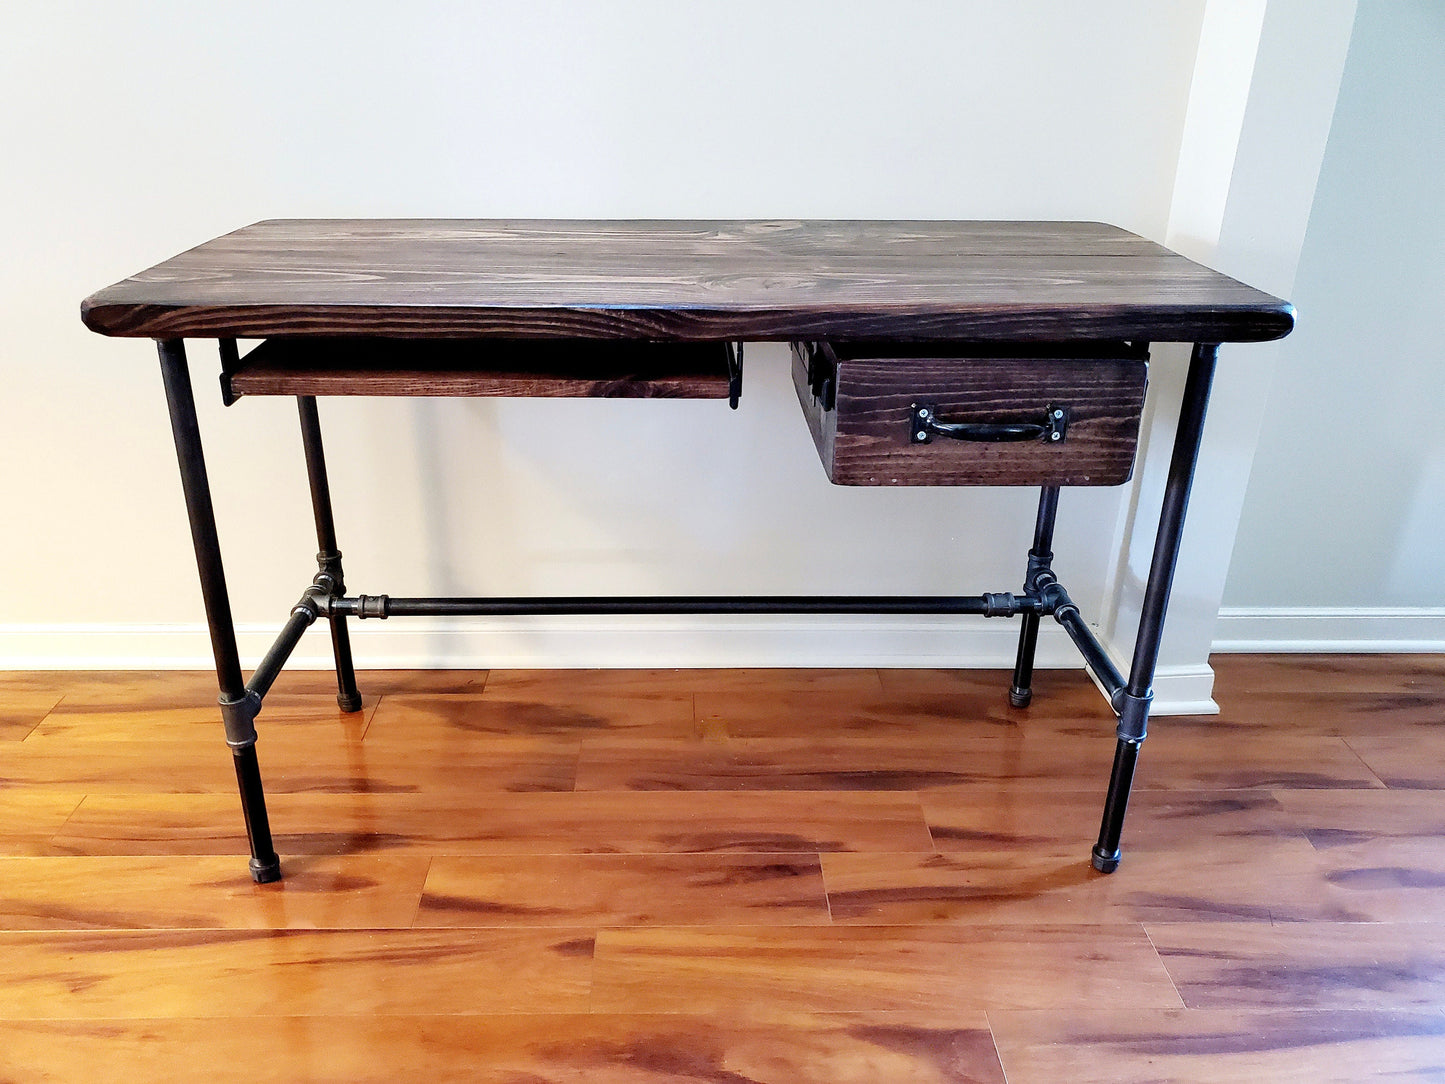 Steel and Wood Desk - Office Iron Pipe Desk with Drawer, Keyboard Tray, Home Office Furniture, Rustic Industrial Style